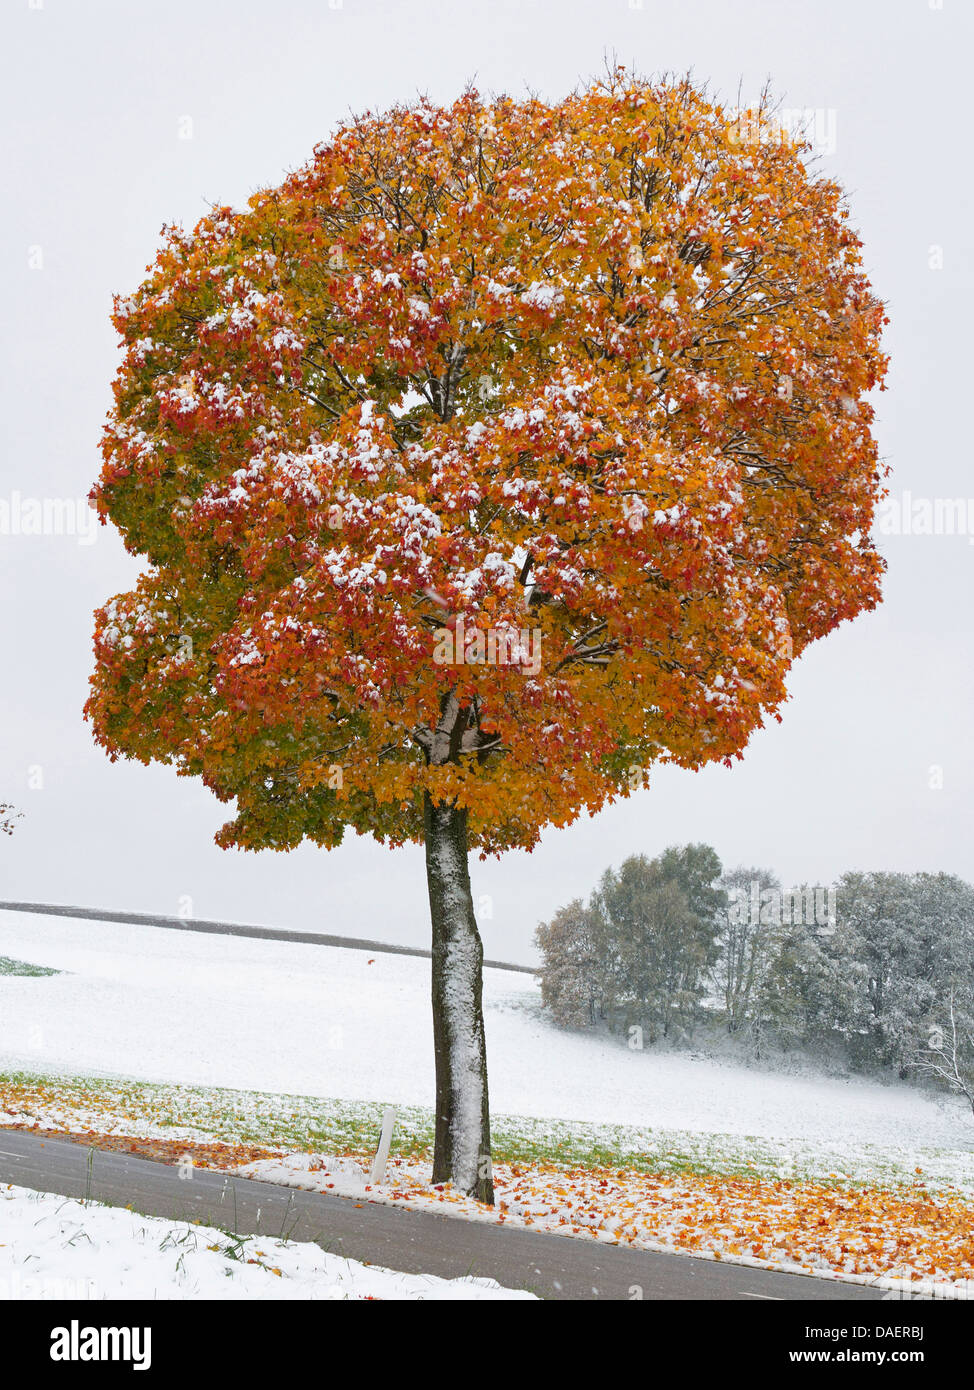 Norway maple (Acer platanoides), maple at a roadside in autumn, Germany, Bavaria Stock Photo